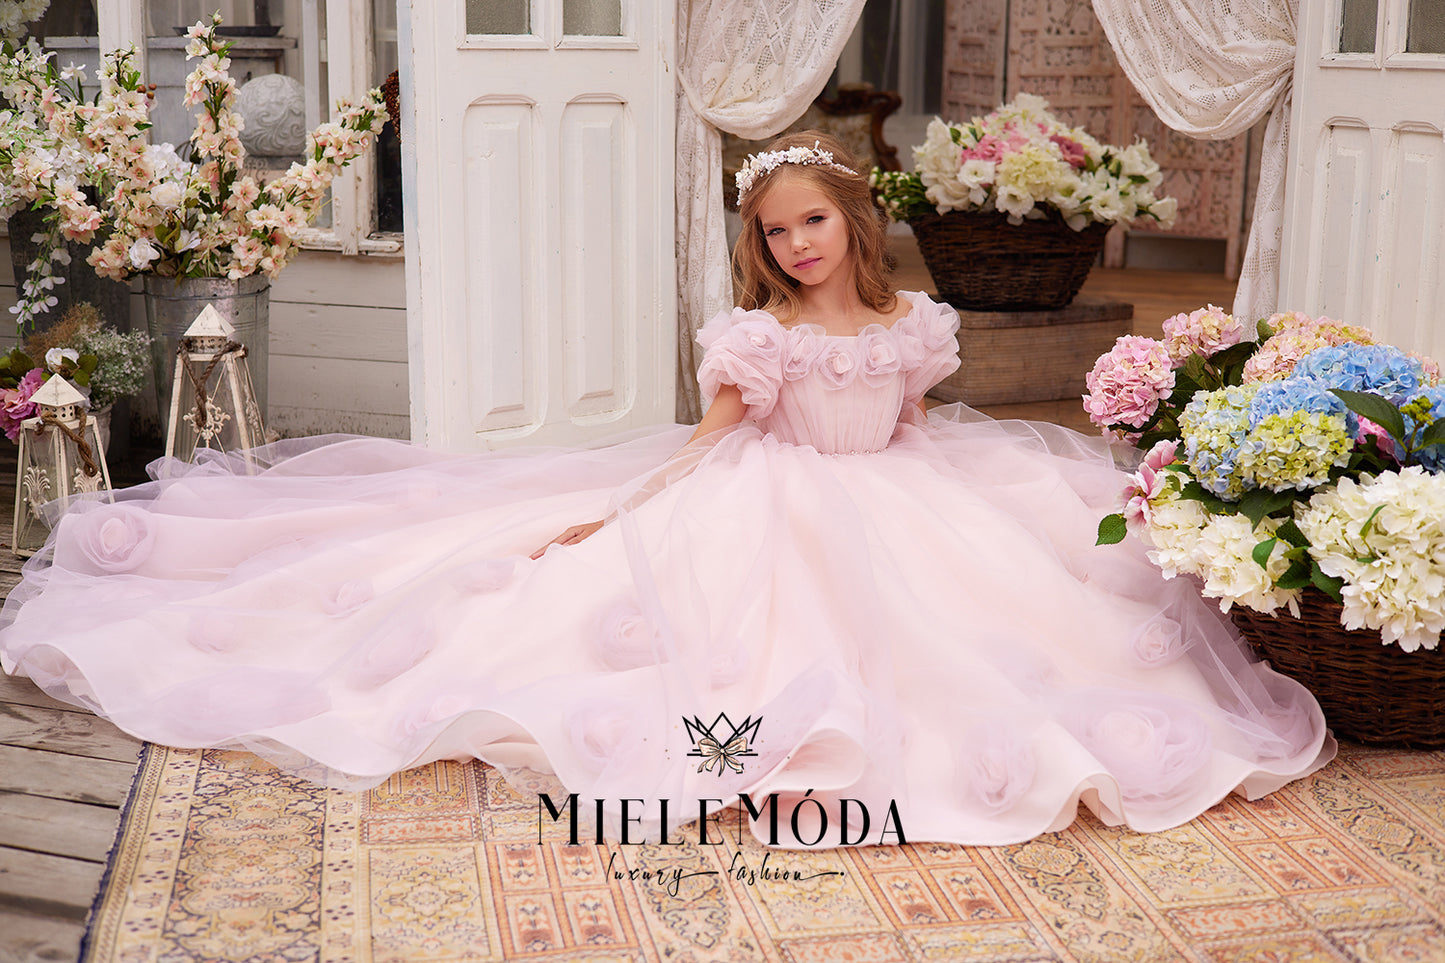 pretty flower girl wearing pink tulle dress with 3d flowers sitting surrounded by beautiful flower baskets